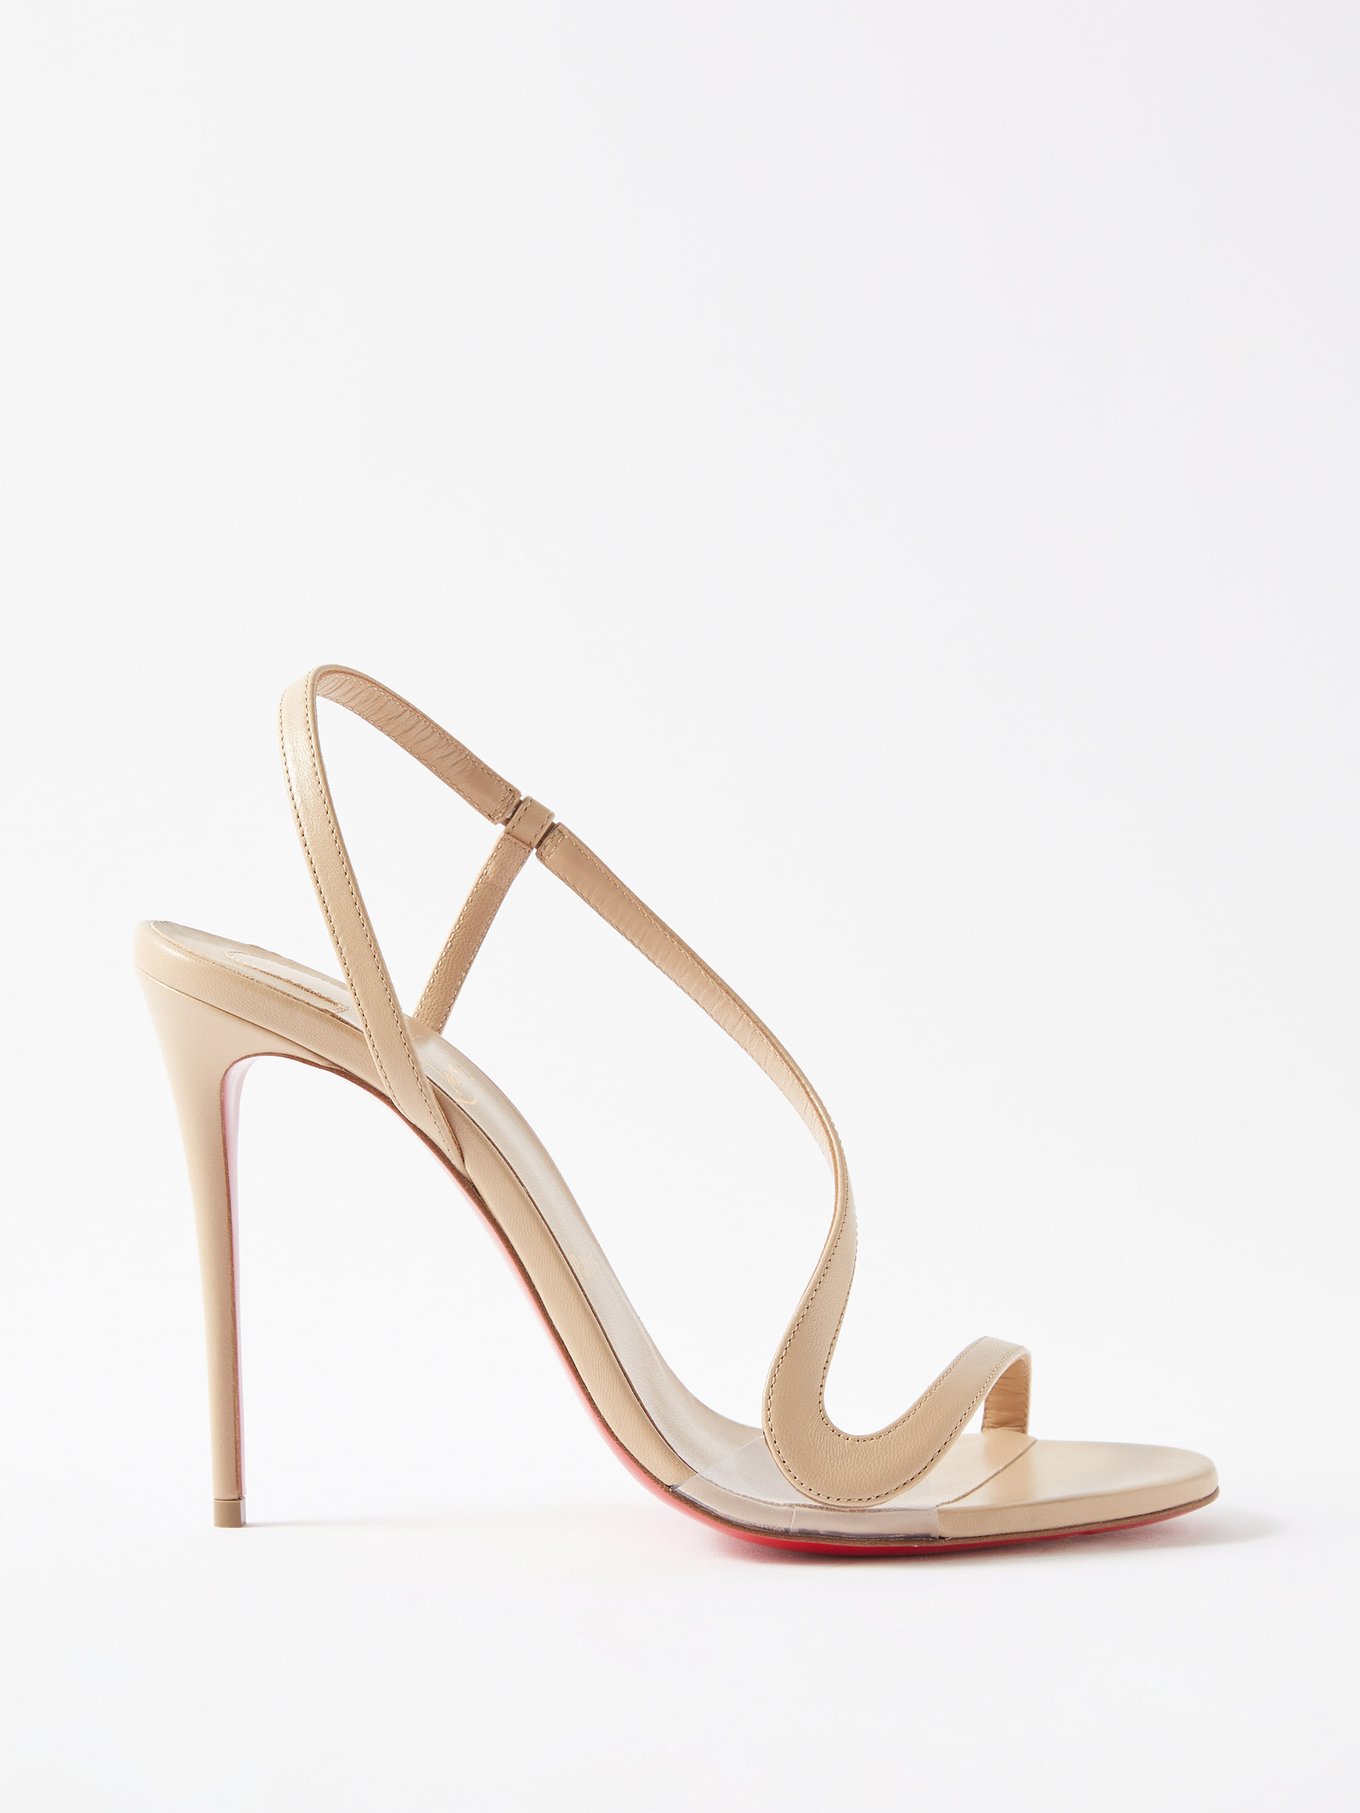 Leather sandals Christian Louboutin Beige size 8.5 US in Leather